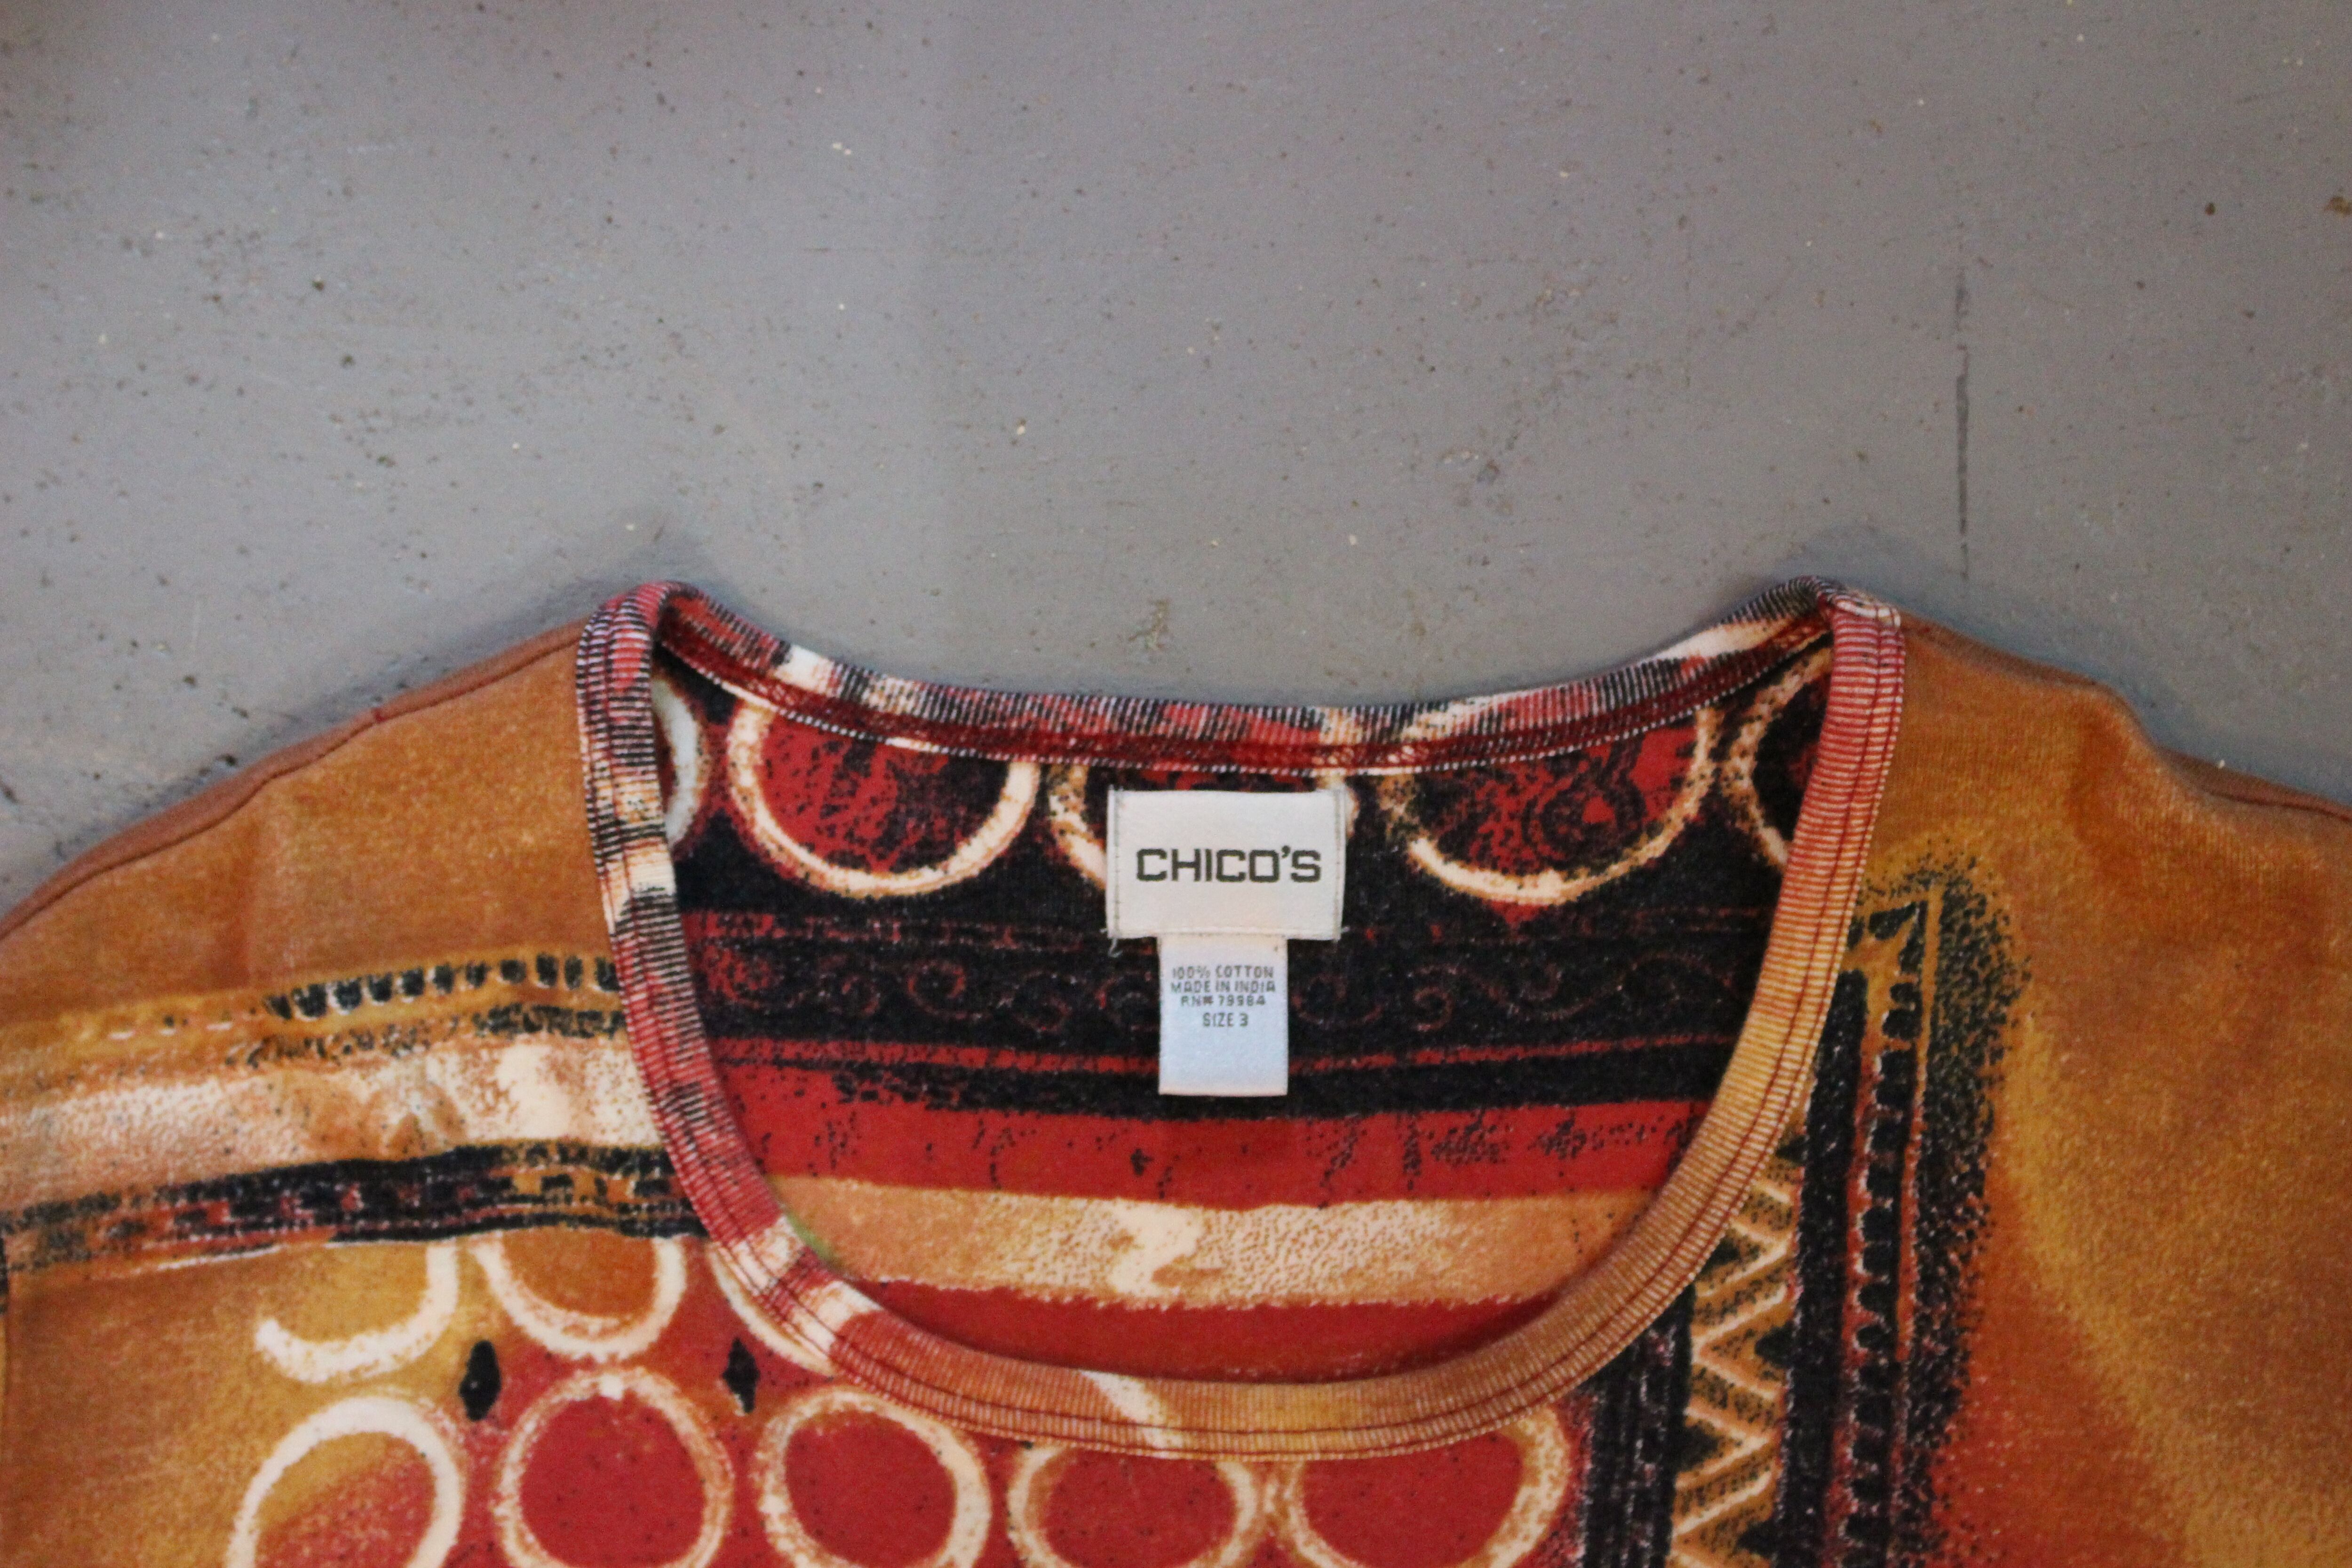 CHICO'S design tops | aNz used & vintage clothing shop